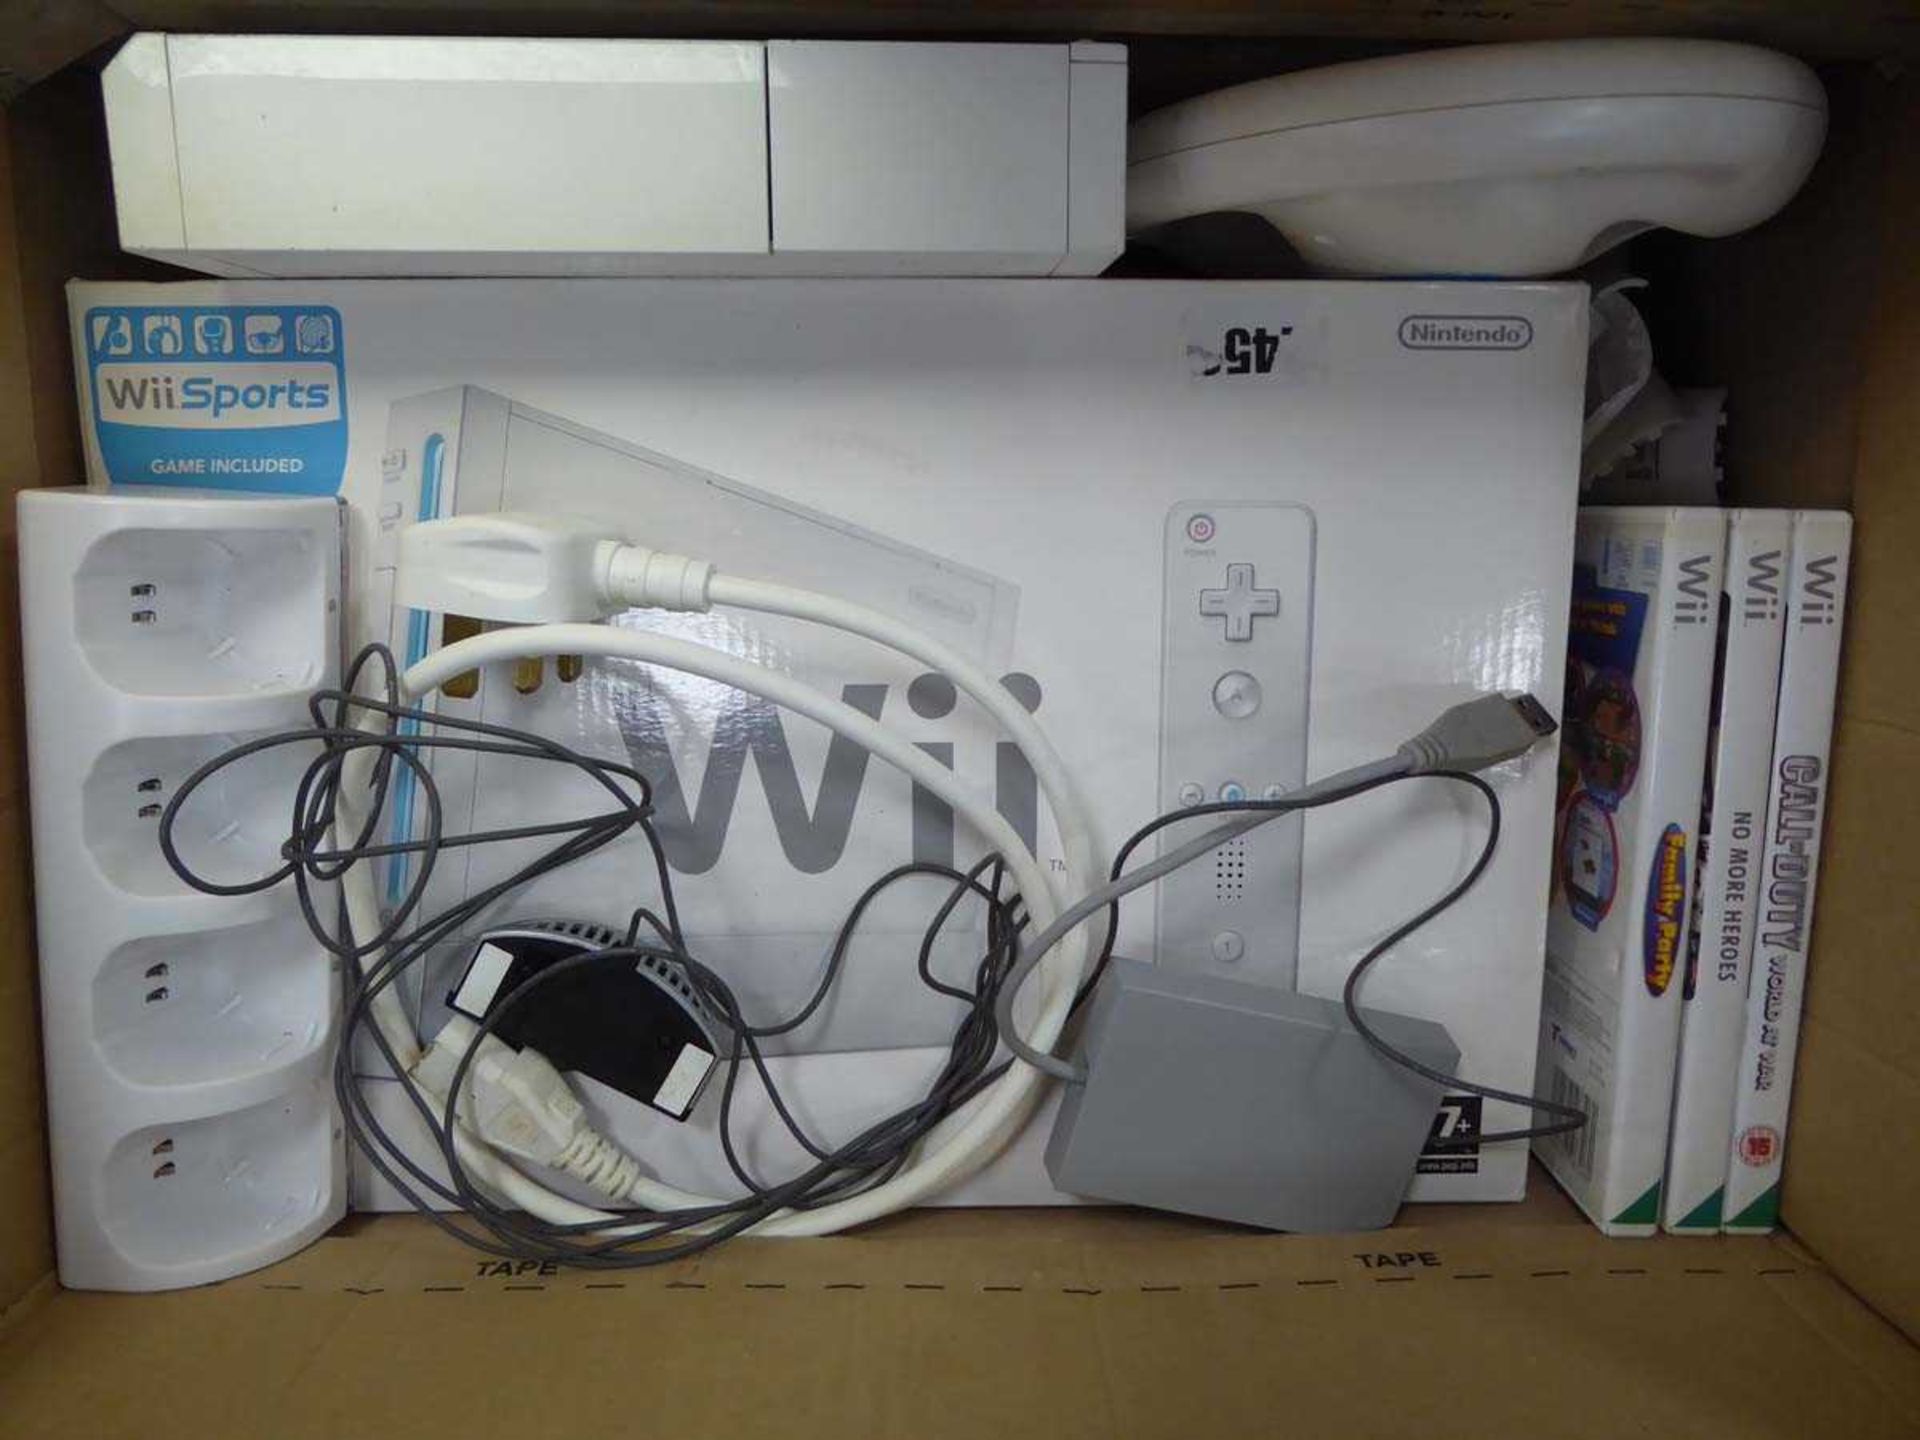 Nintendo Wii console with games and accessories